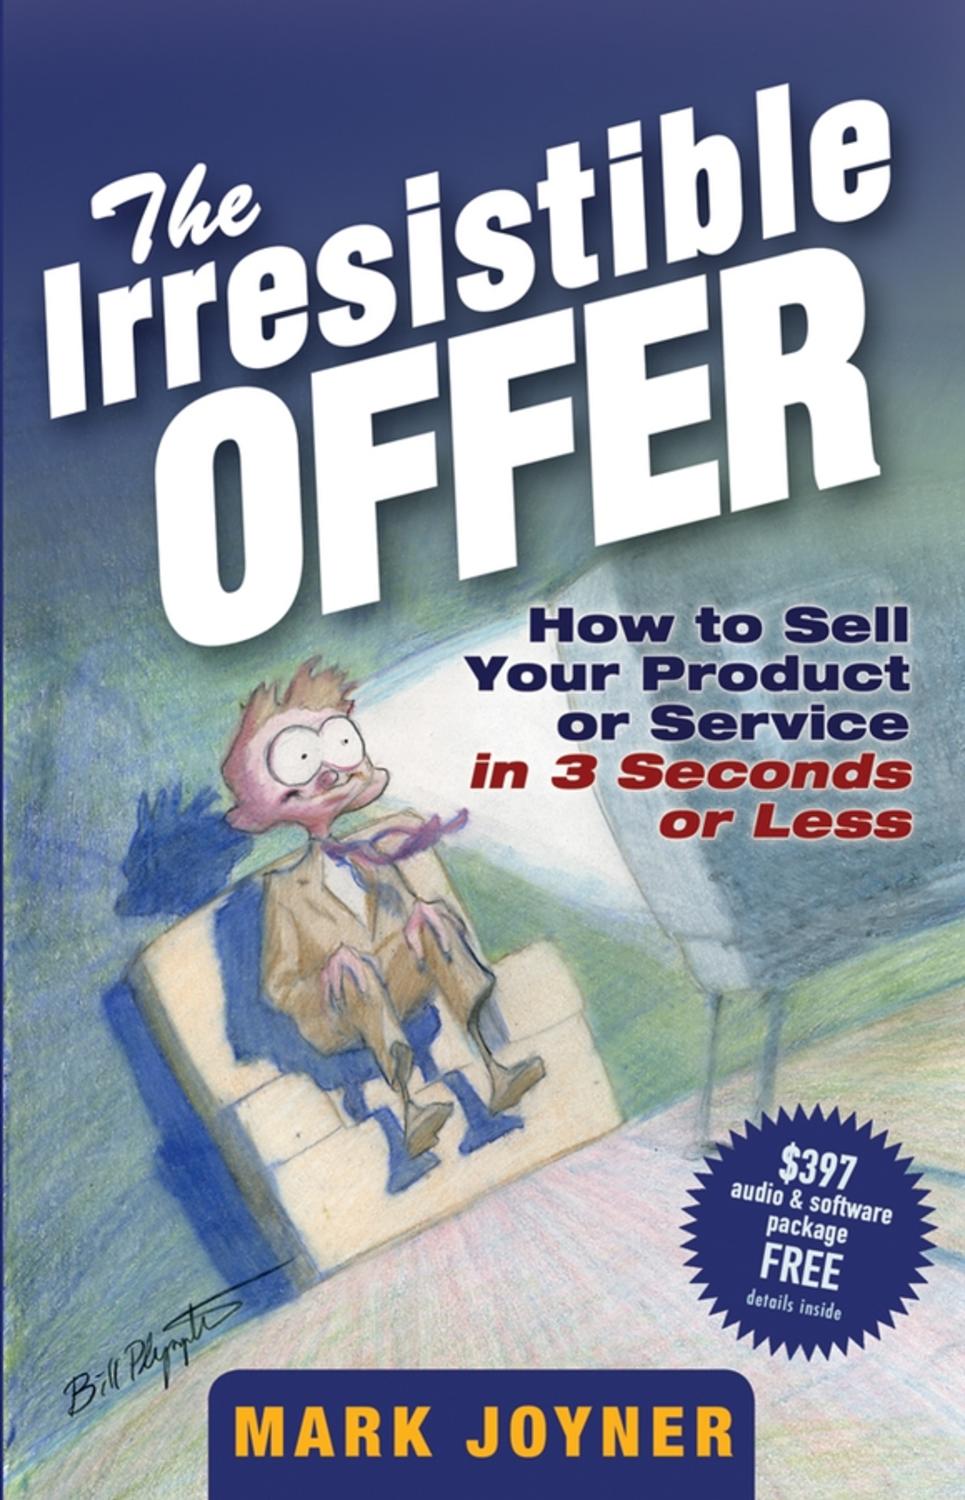 Service　Less　–　Your　to　Sell　Litres　Offer.　Irresistible　The　at　or　online　or　in　How　read　Product　Seconds　Mark　Joyner,